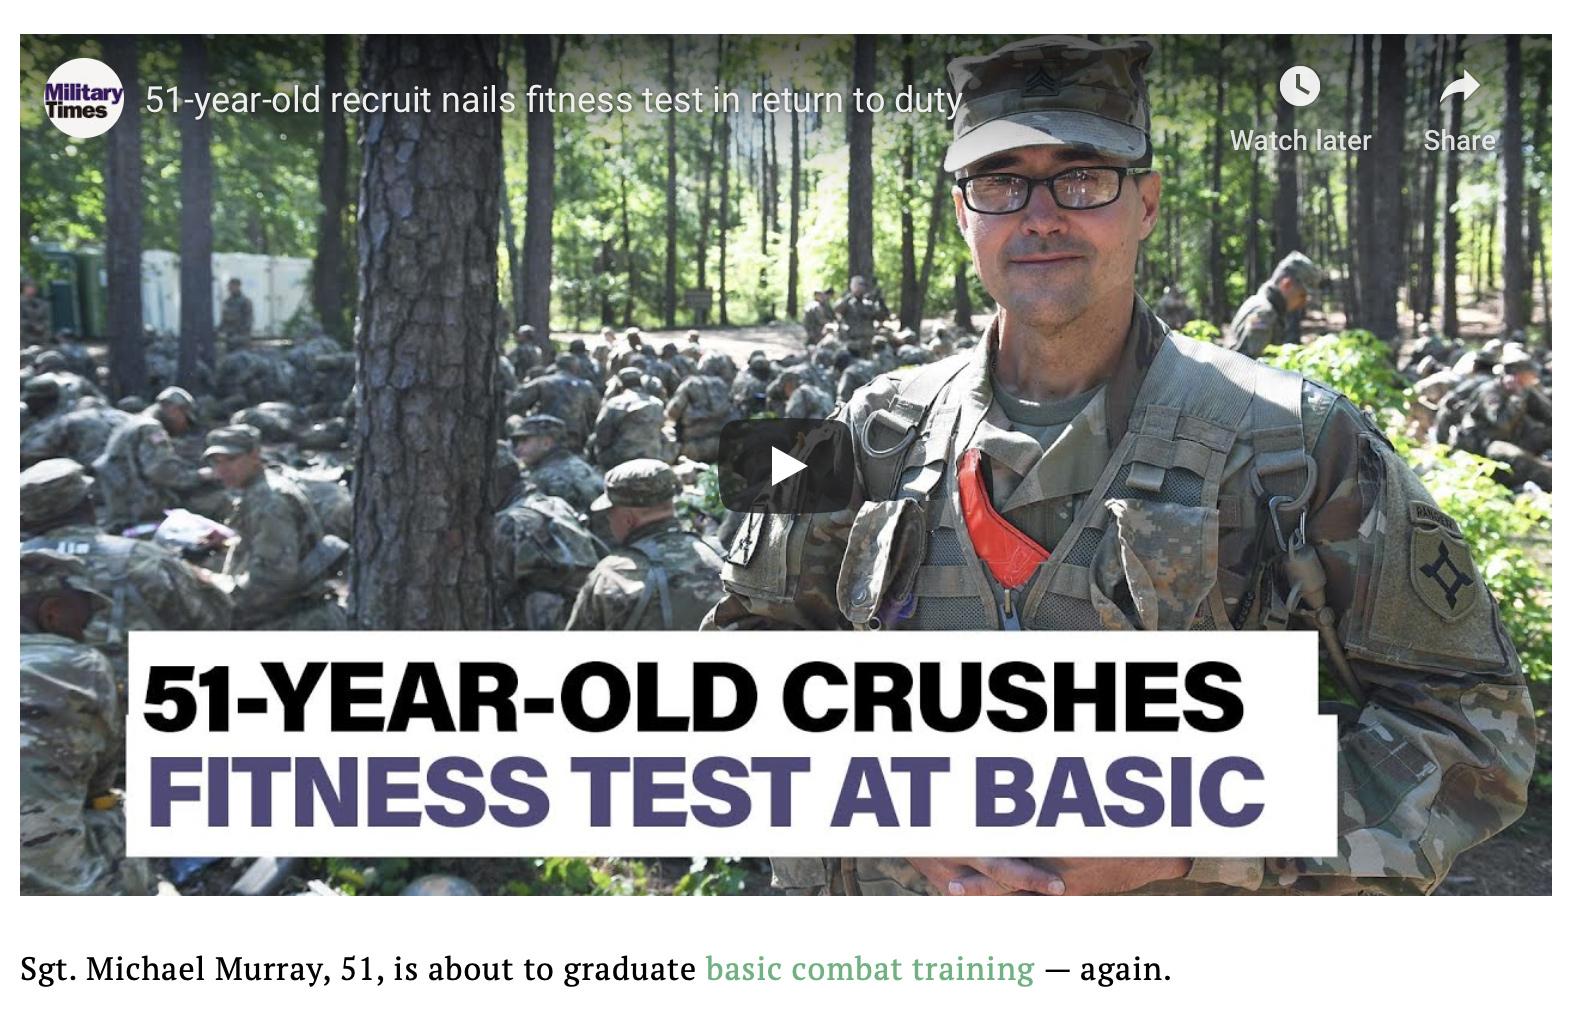  51-year-old crushes ACFT, readies for BCT graduation and EOD school